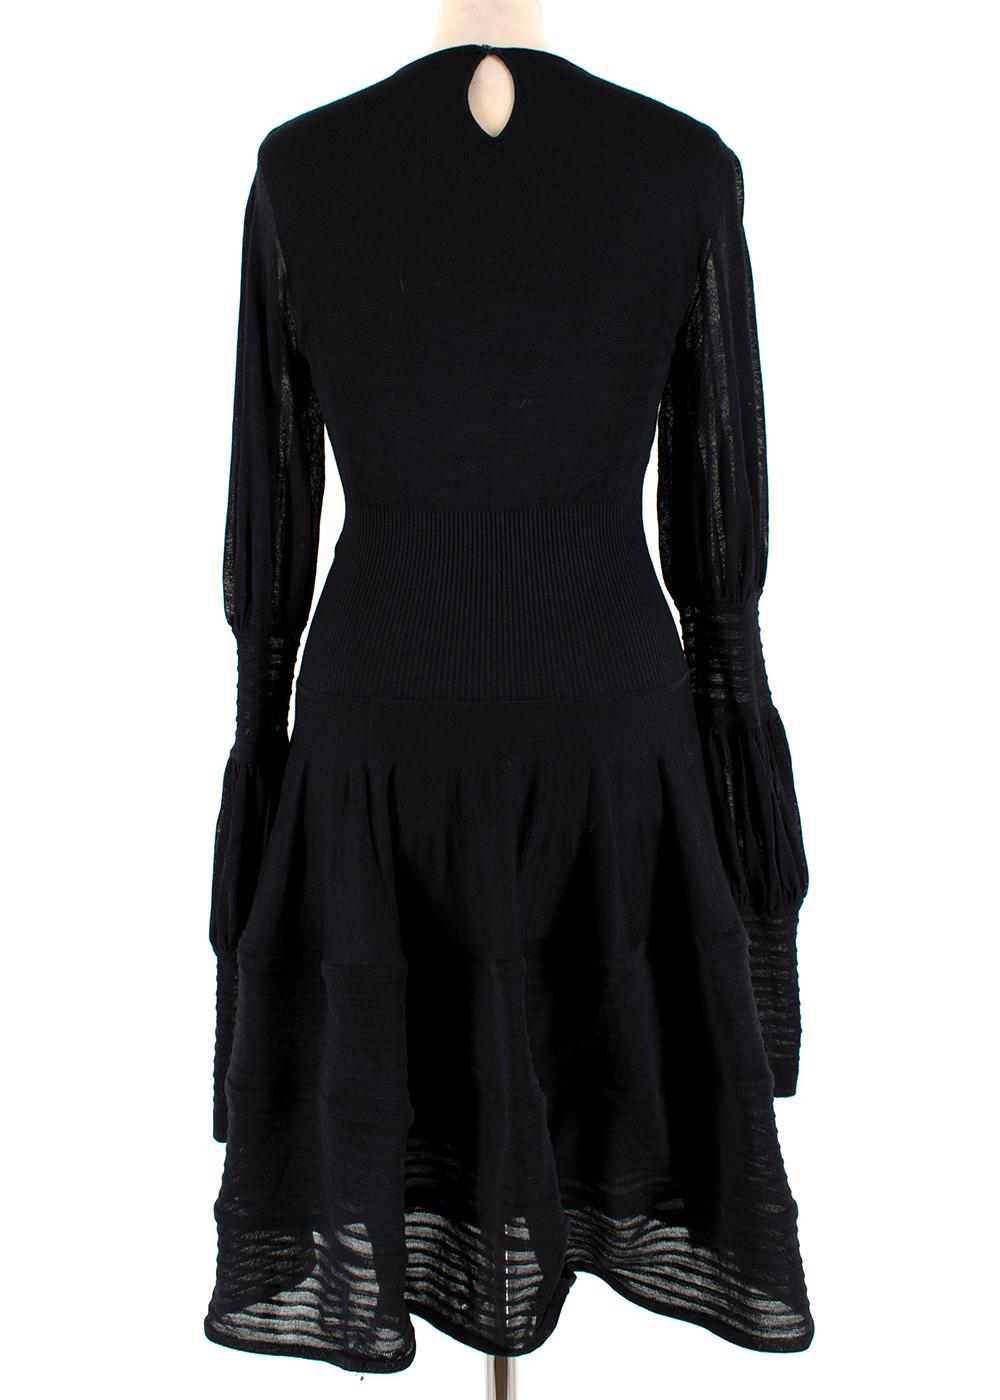 Alexander McQueen Black Ribbed Silk Dress

- Ribbed detail dress
- Cuffed sleeves 
- Button fastening
- Lined hem 
- Silk slip 
- Fitted style 
- Size M 

Dry Clean Only 

Shoulders - 41cm 
Sleeves - 82cm
Chest - 41cm
Waist - 20cm
Length - 205cm 
